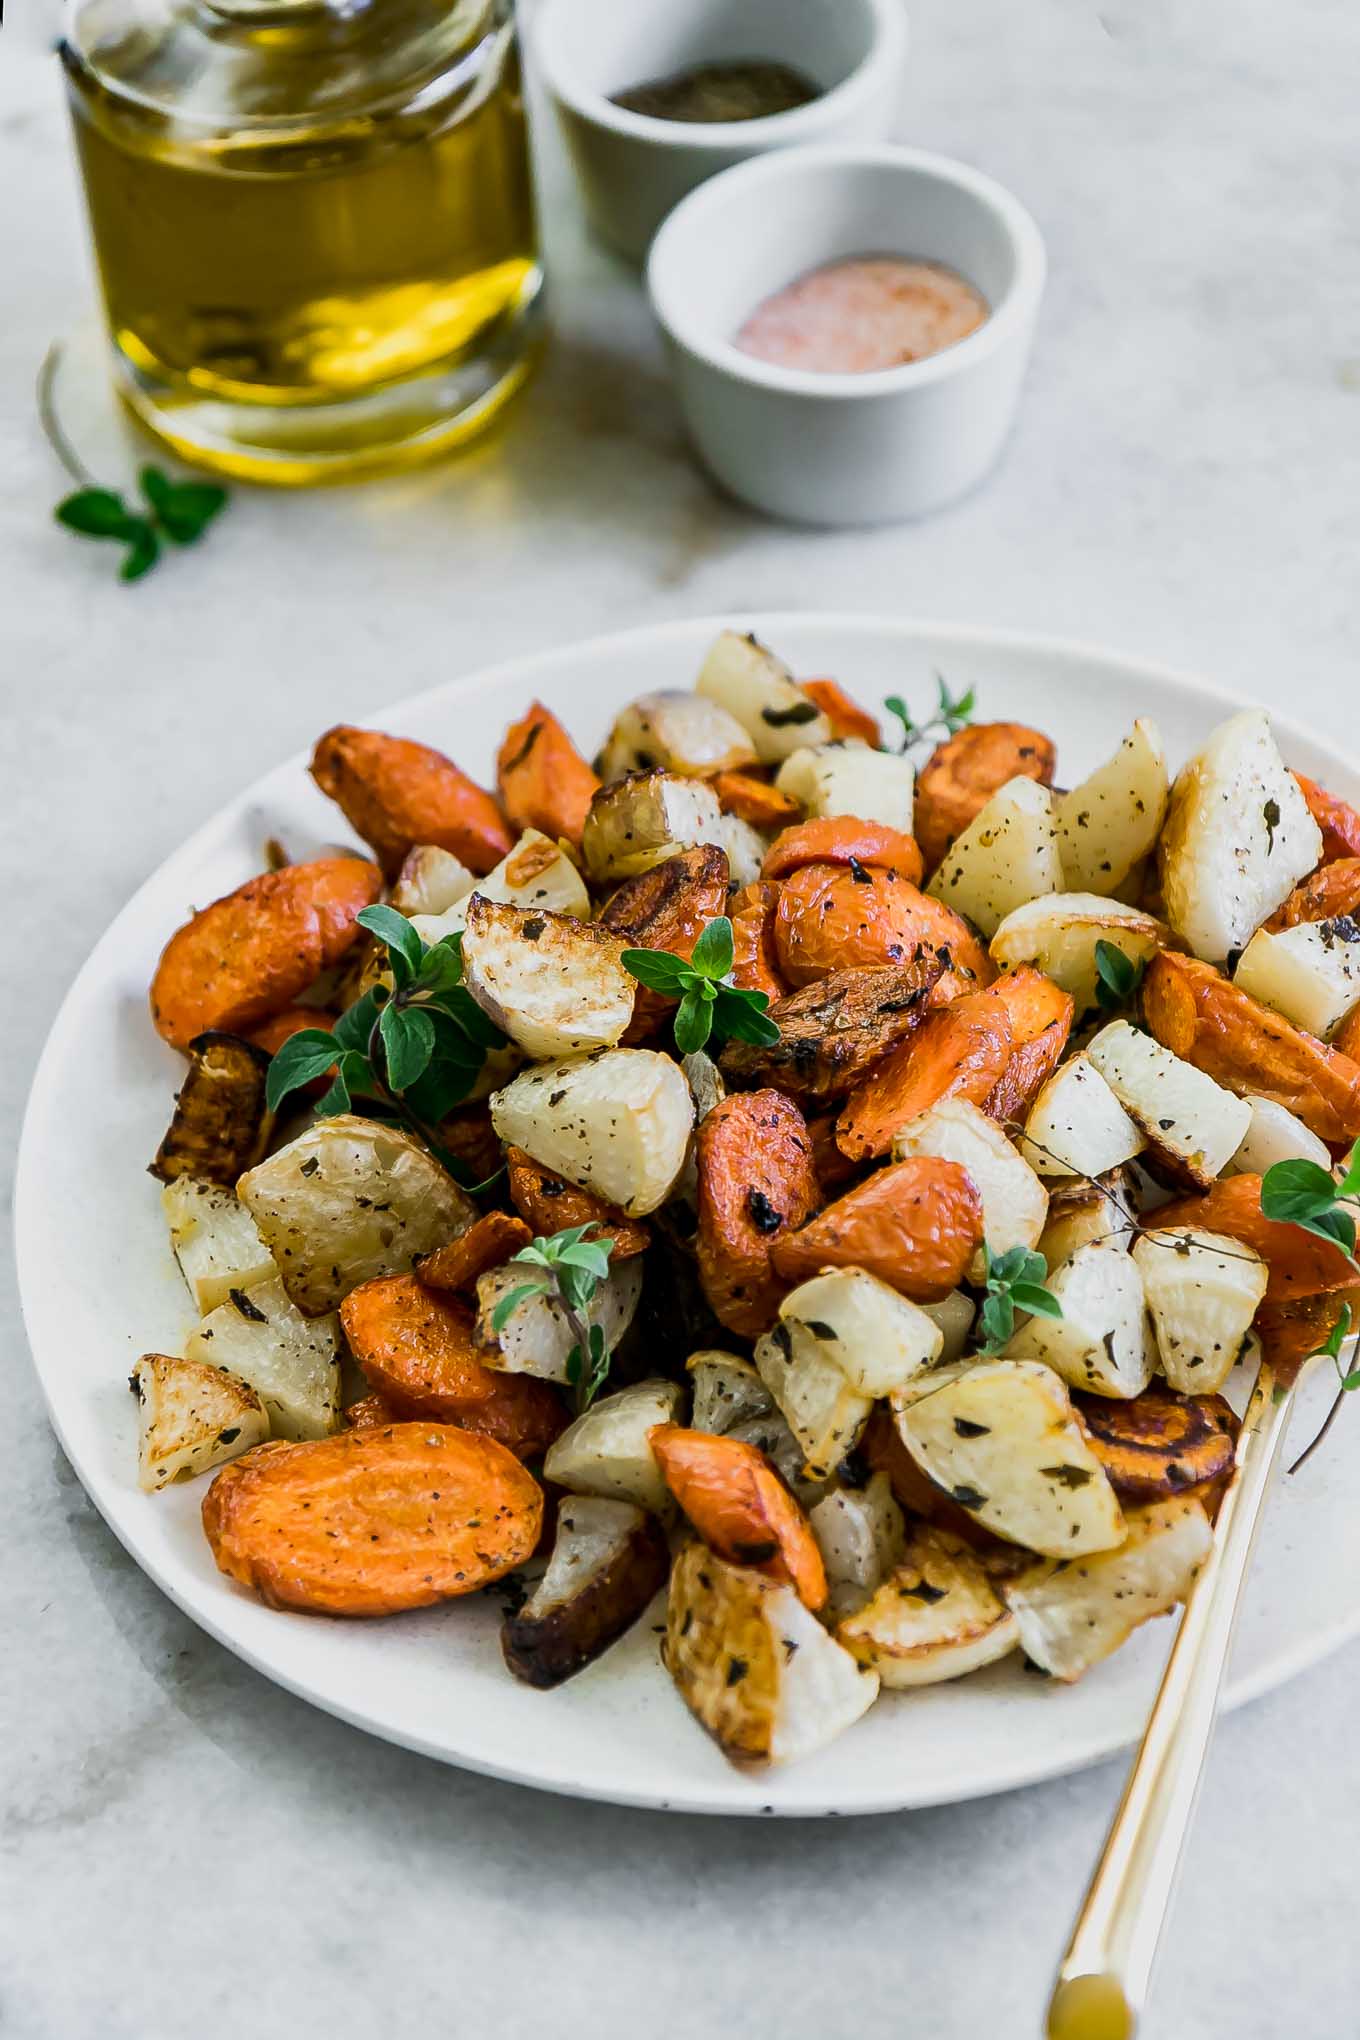 Herb Roasted Turnips and Carrots ⋆ Super Easy! (5 Ingredients + 30 Mins)